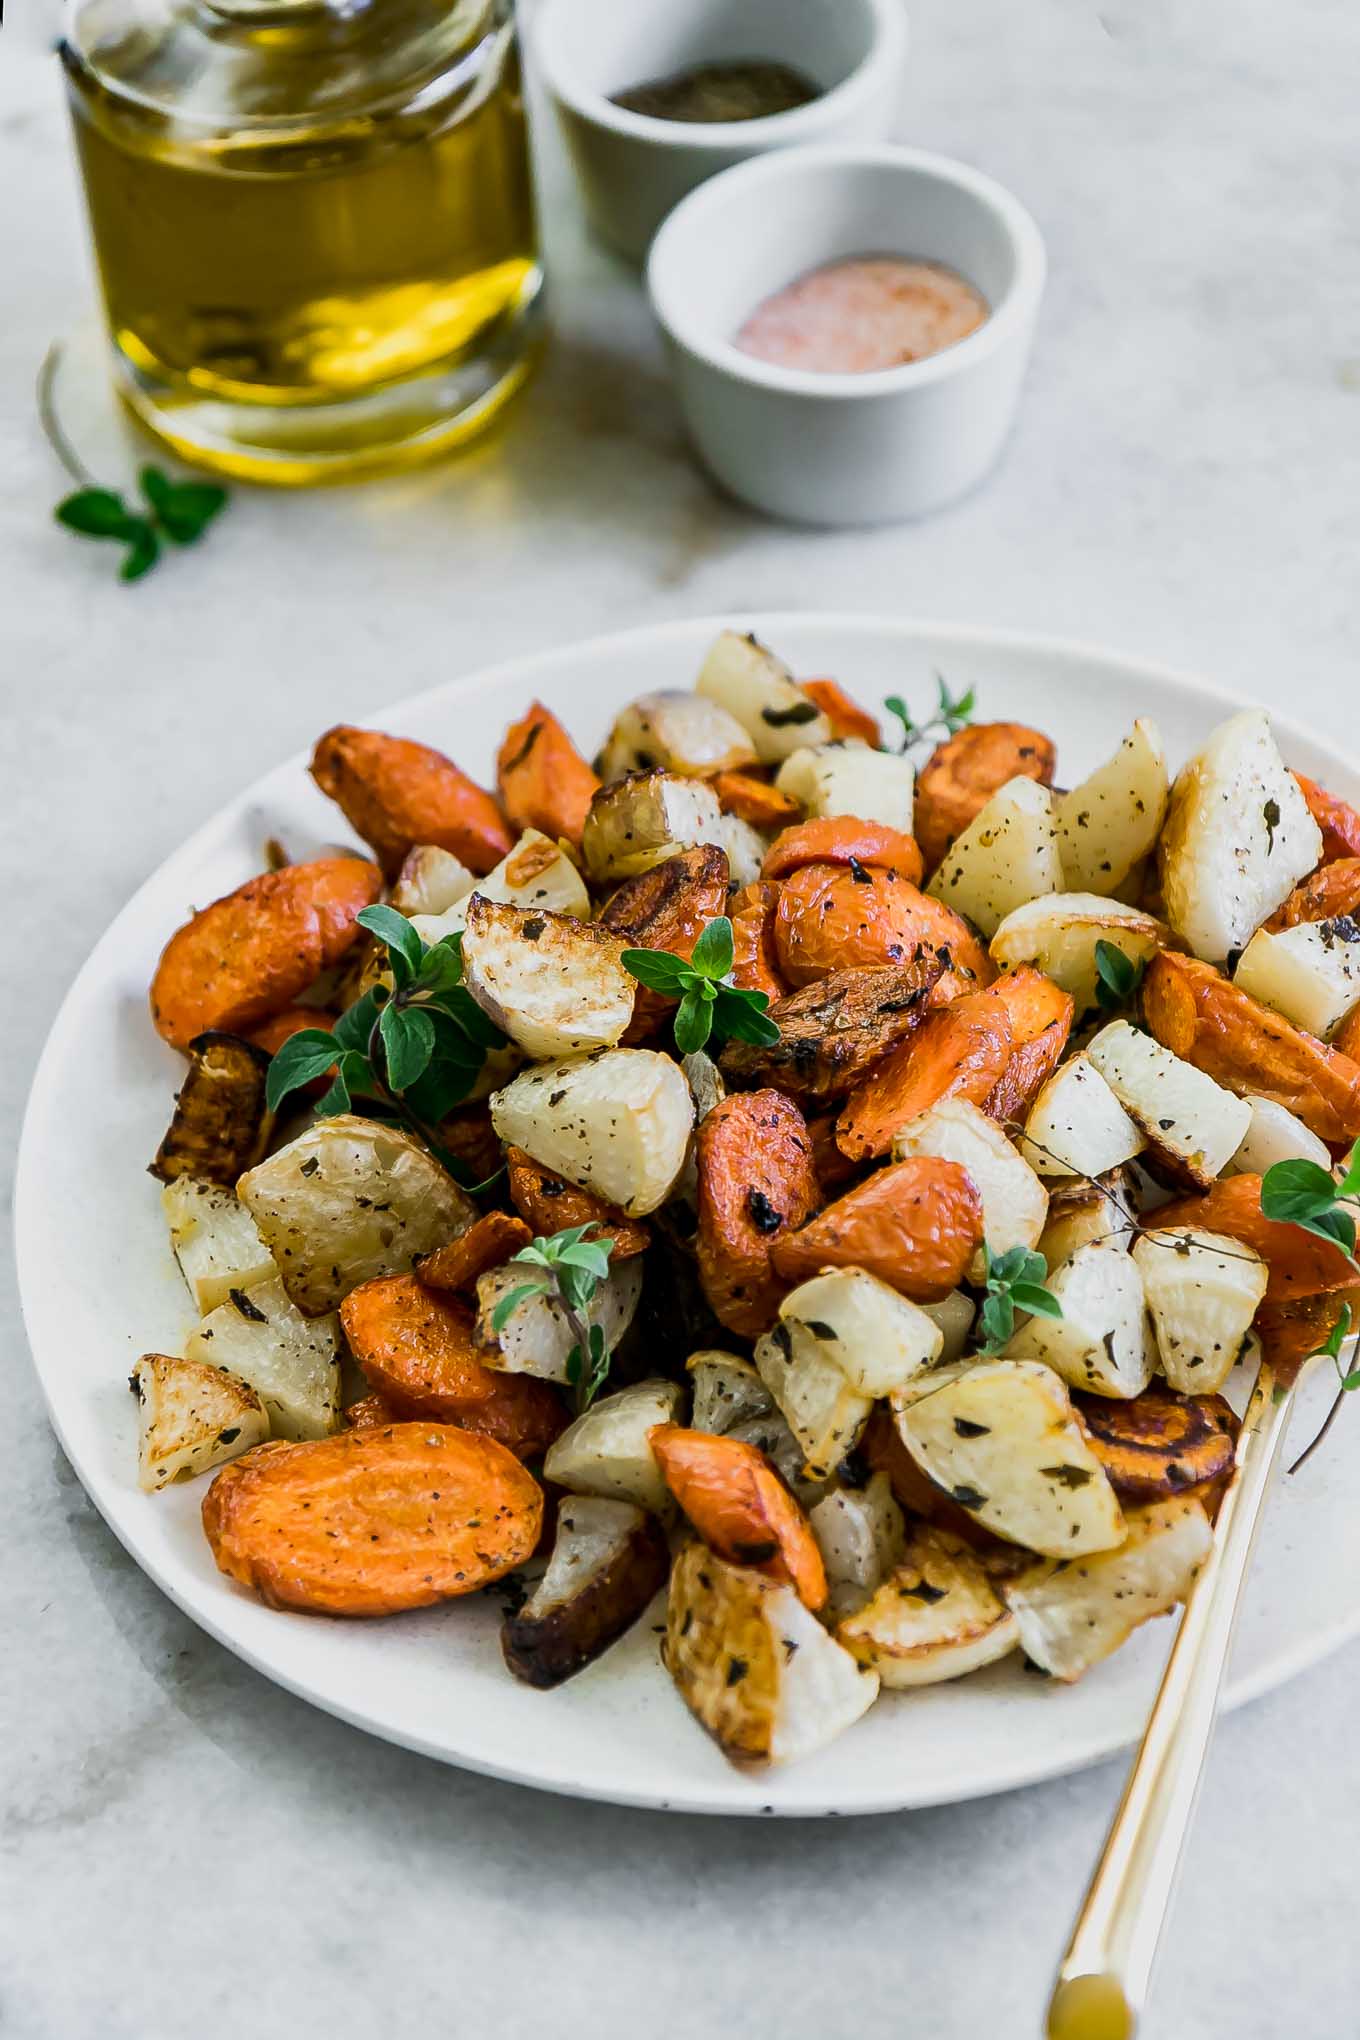 Herb Roasted Turnips and Carrots ⋆ Super Easy! (5 Ingredients + 30 Mins)